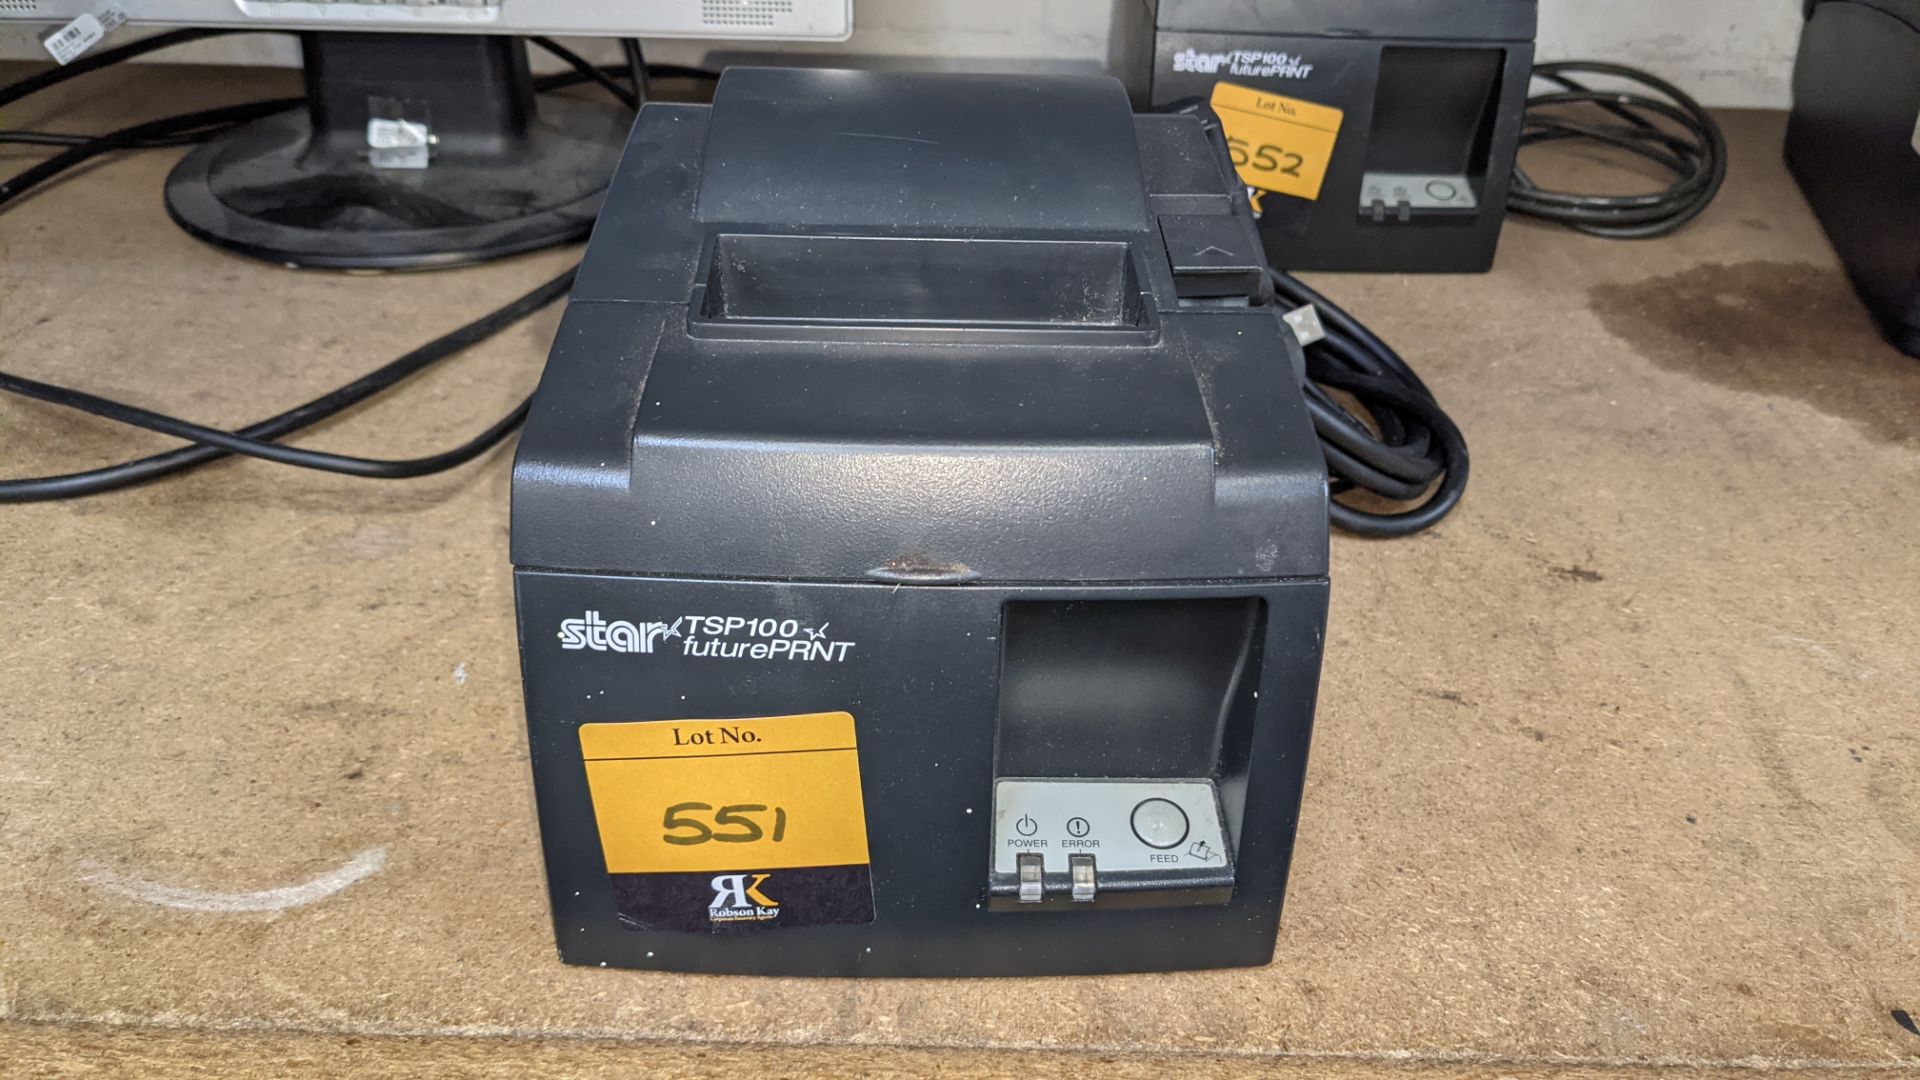 Star TSP100 label printer - includes power and usb cables. - Image 2 of 8